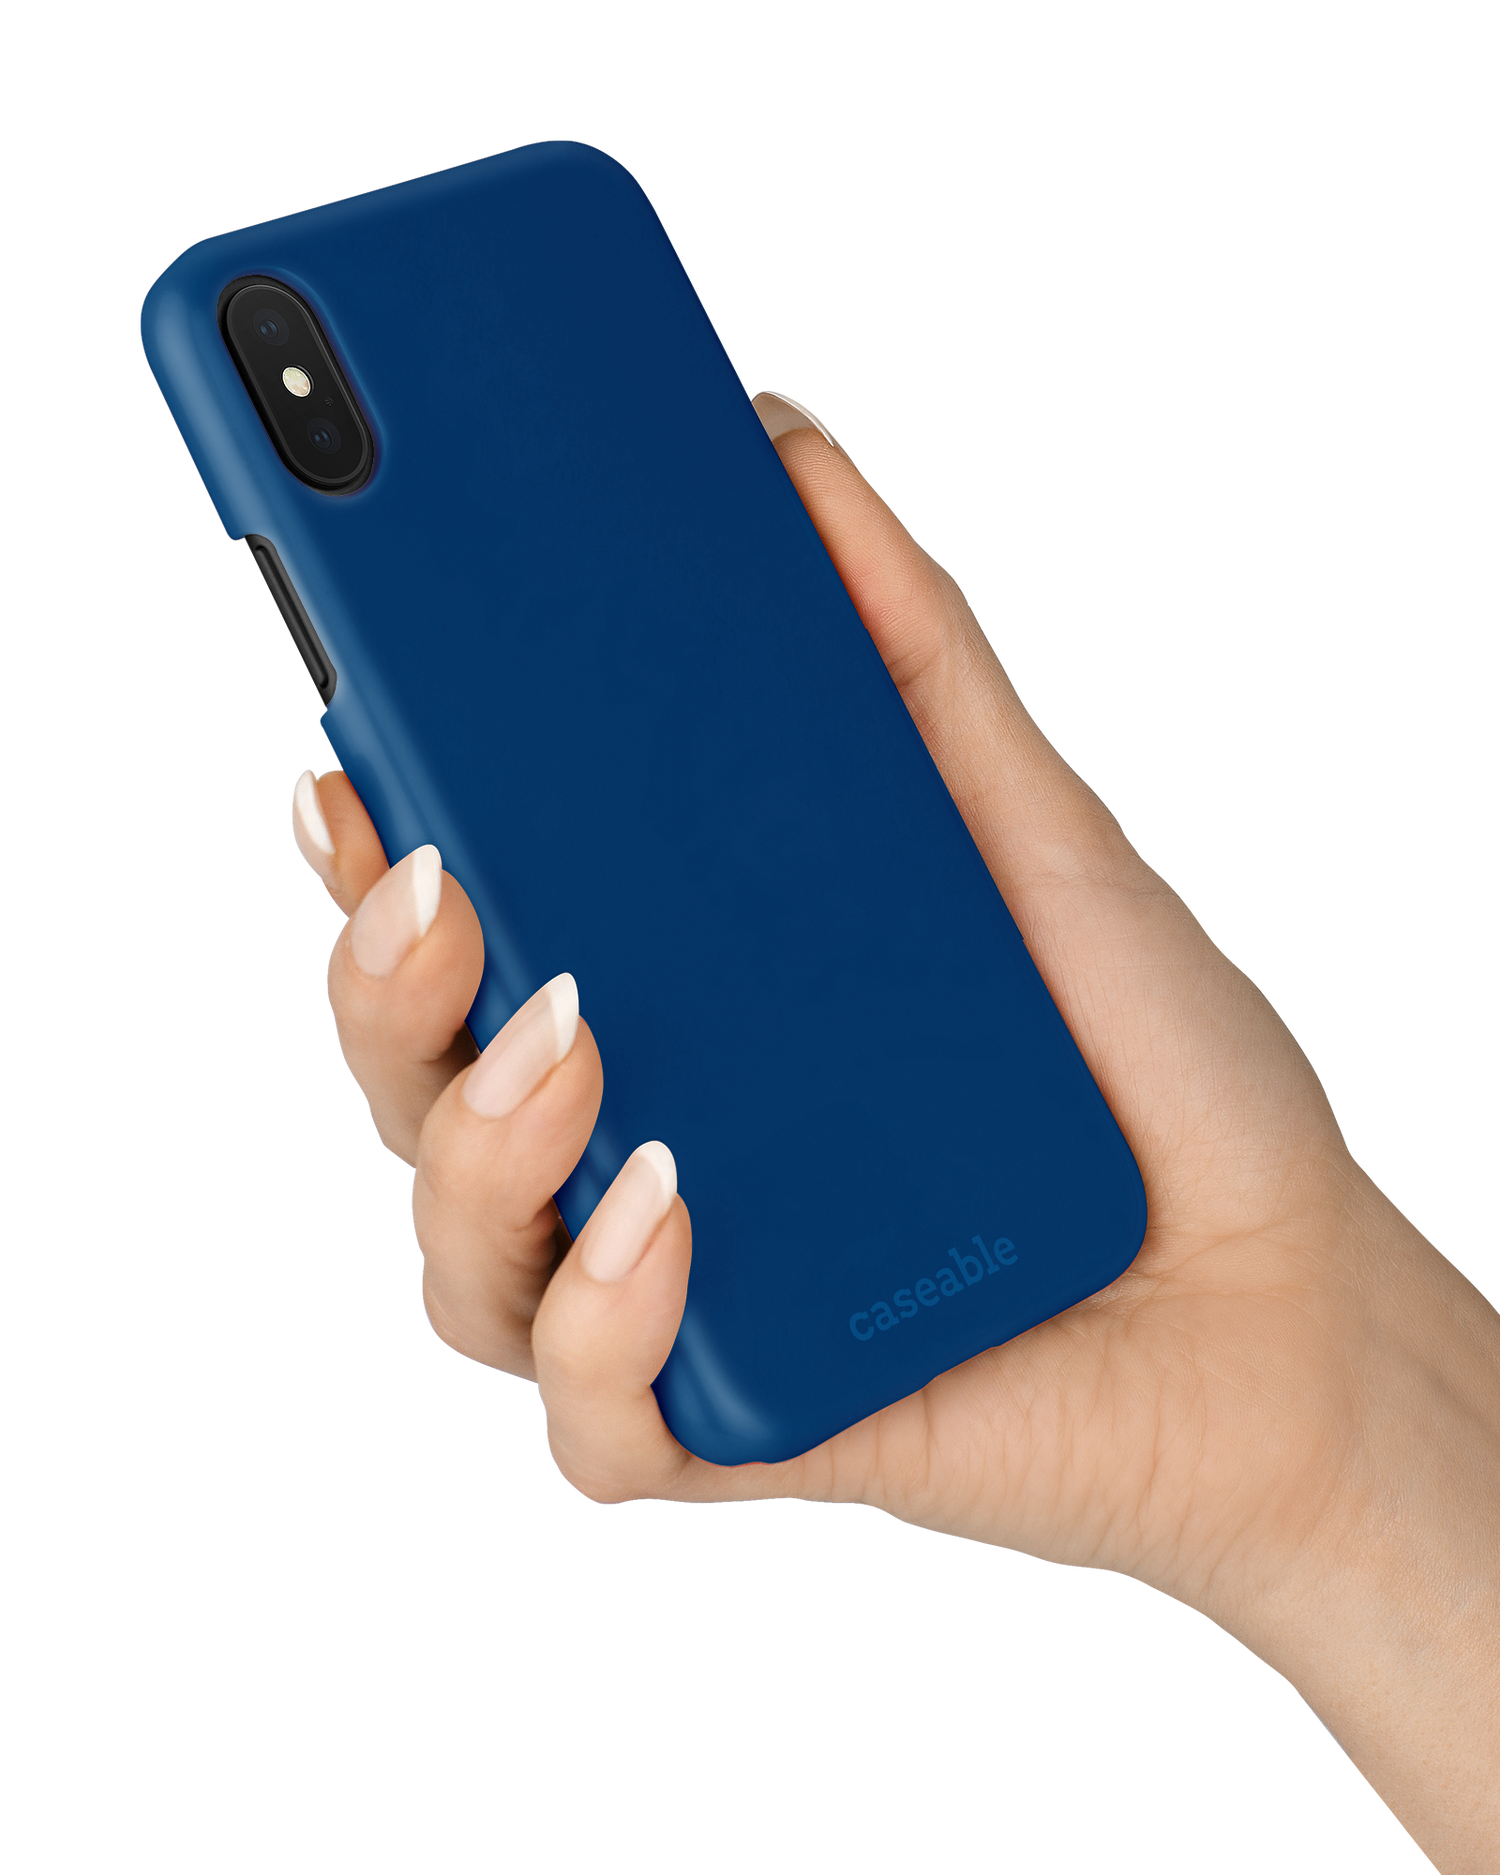 CLASSIC BLUE Hard Shell Phone Case Apple iPhone X, Apple iPhone XS held in hand